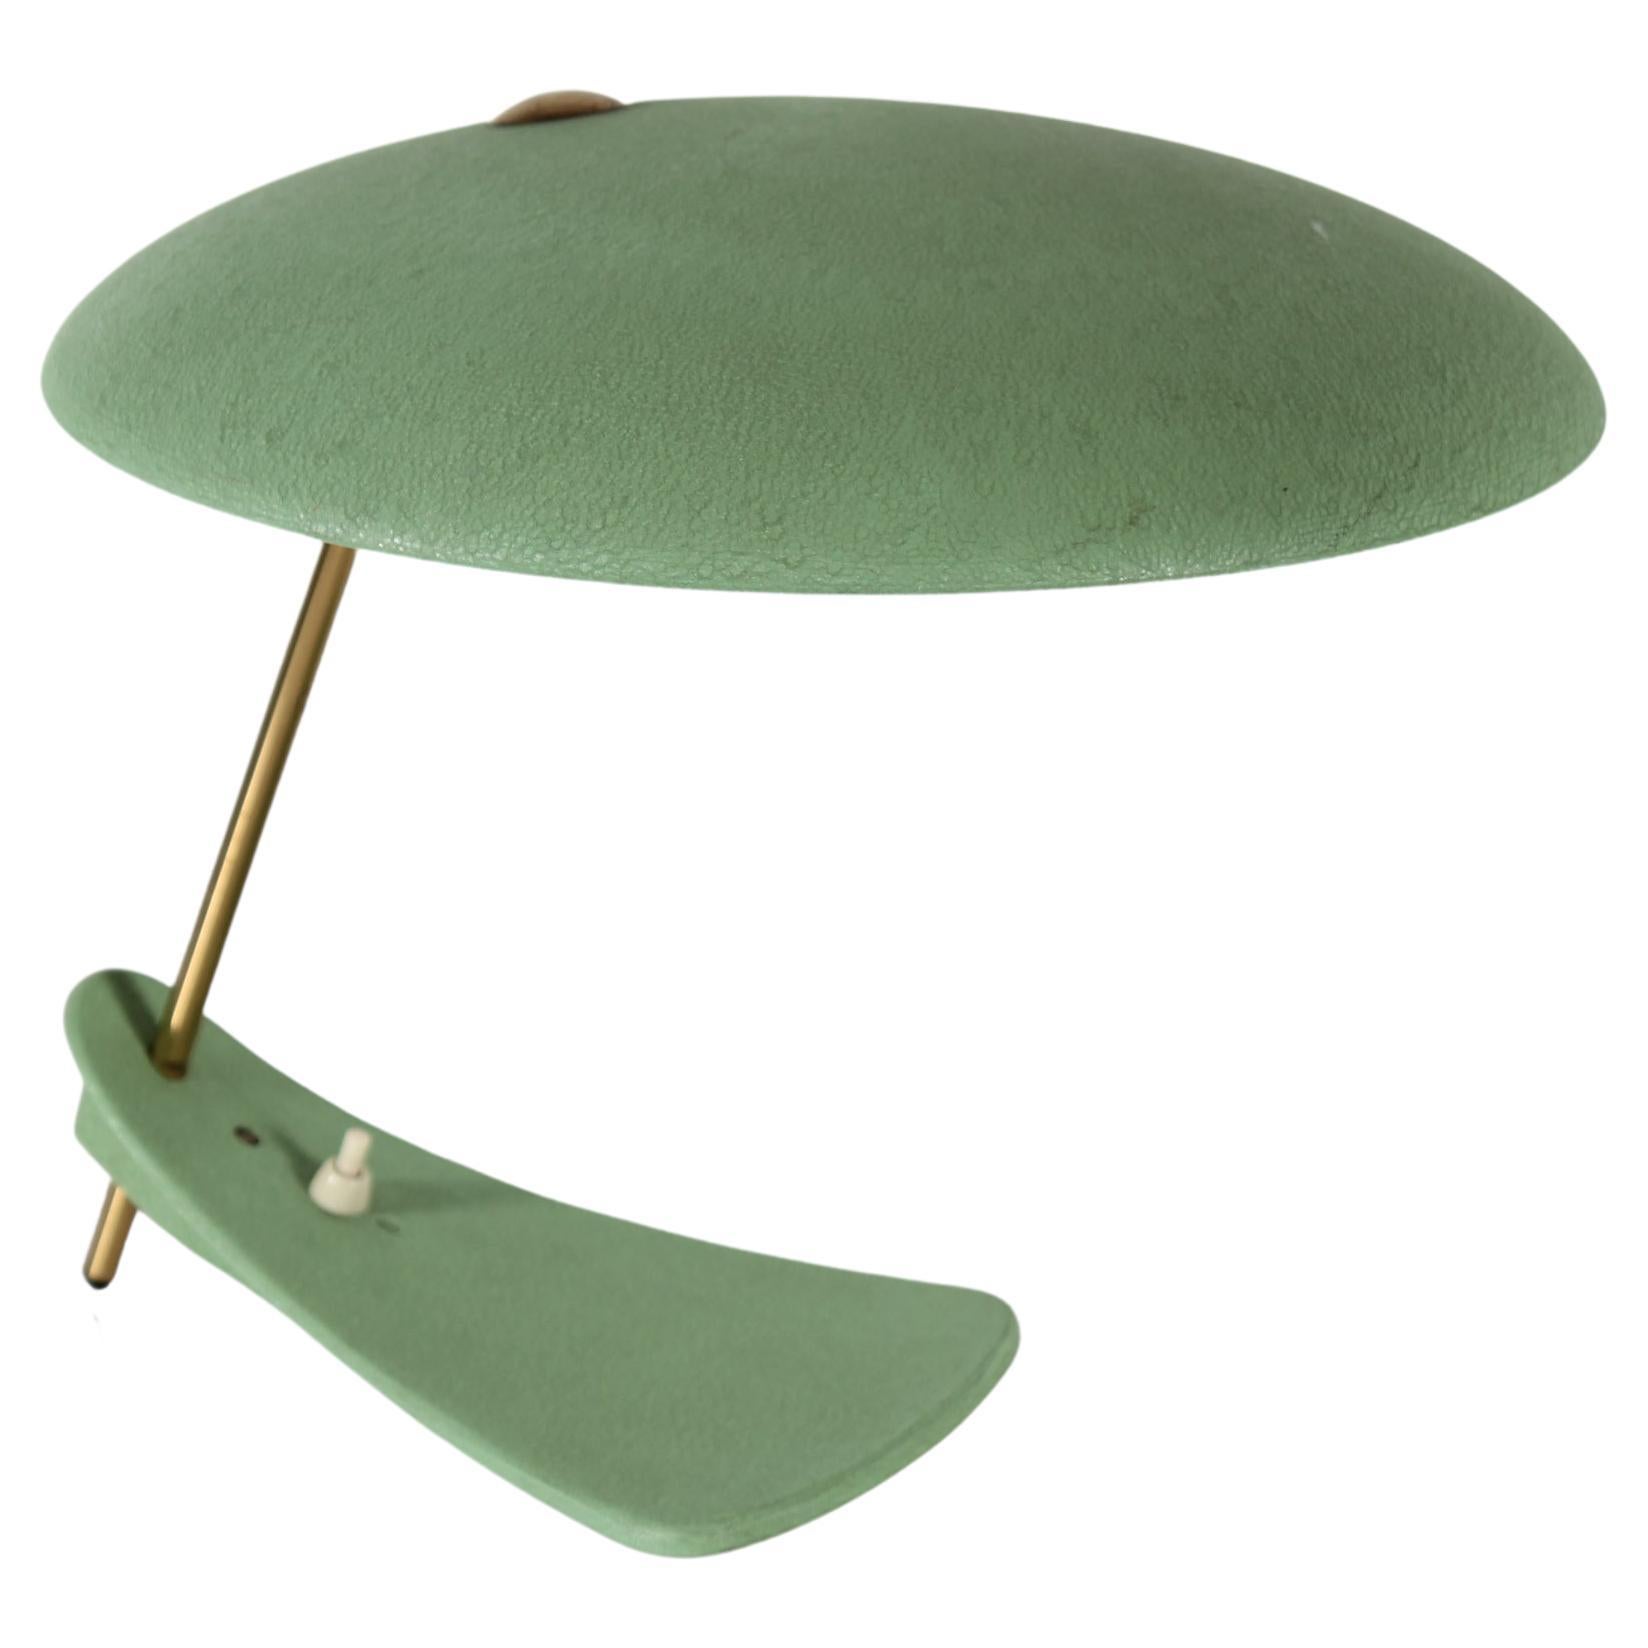 Italian Ufo Table Lamp Dusty Green Lacquer Floating Foot, Stilnovo Style, 1950s For Sale